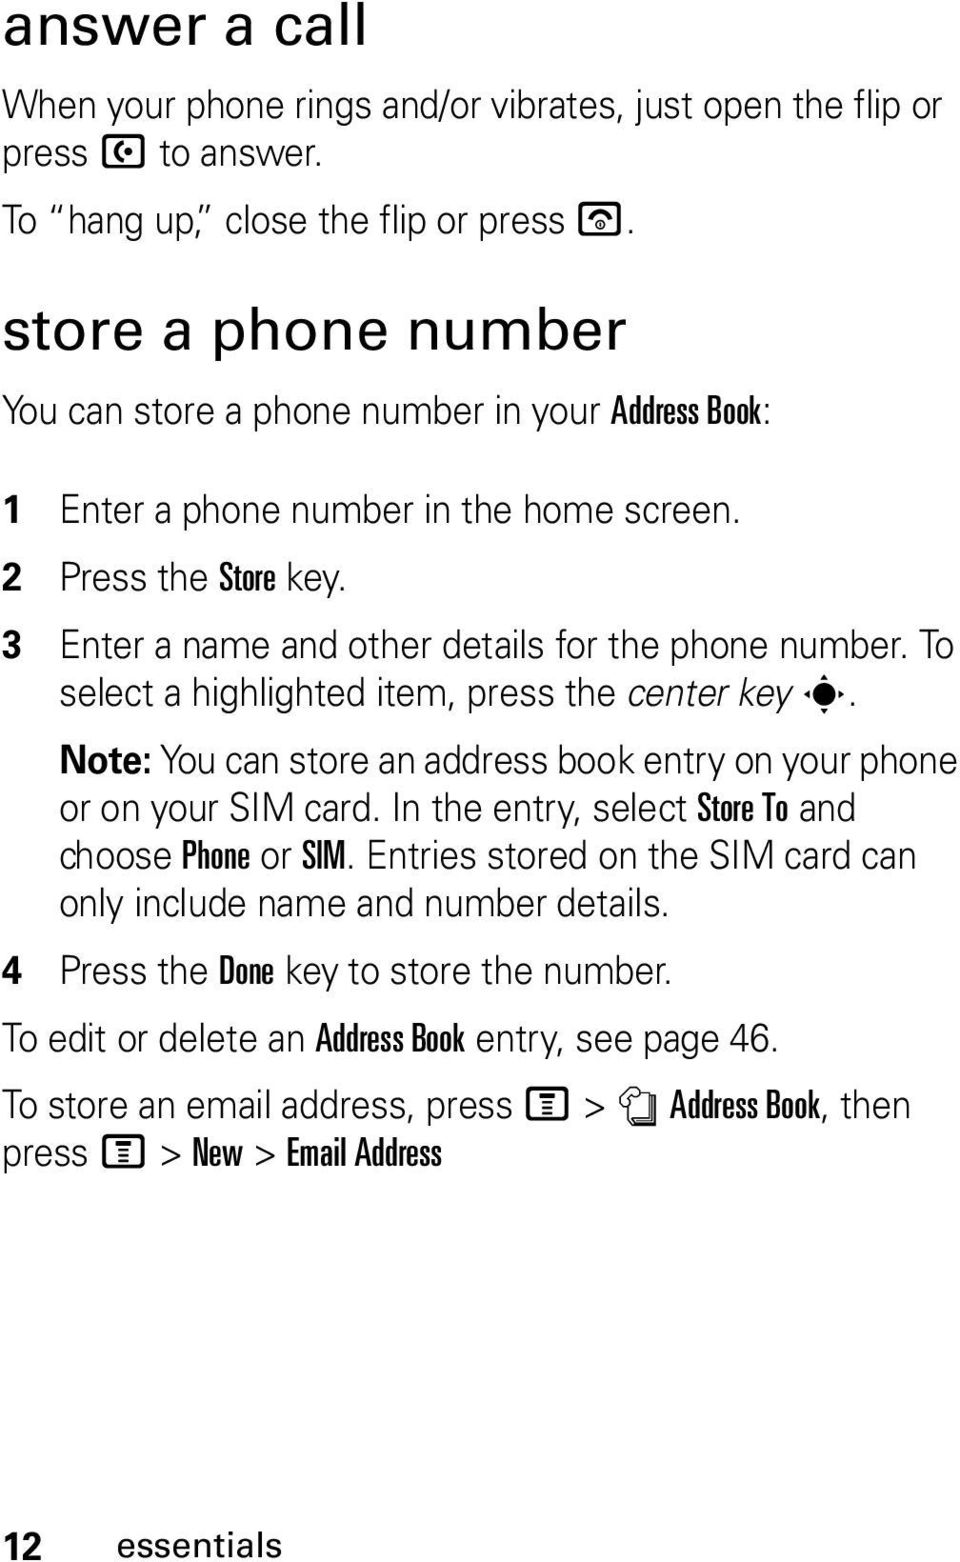 To select a highlighted item, press the center key s. Note: You can store an address book entry on your phone or on your SIM card. In the entry, select Store To and choose Phone or SIM.